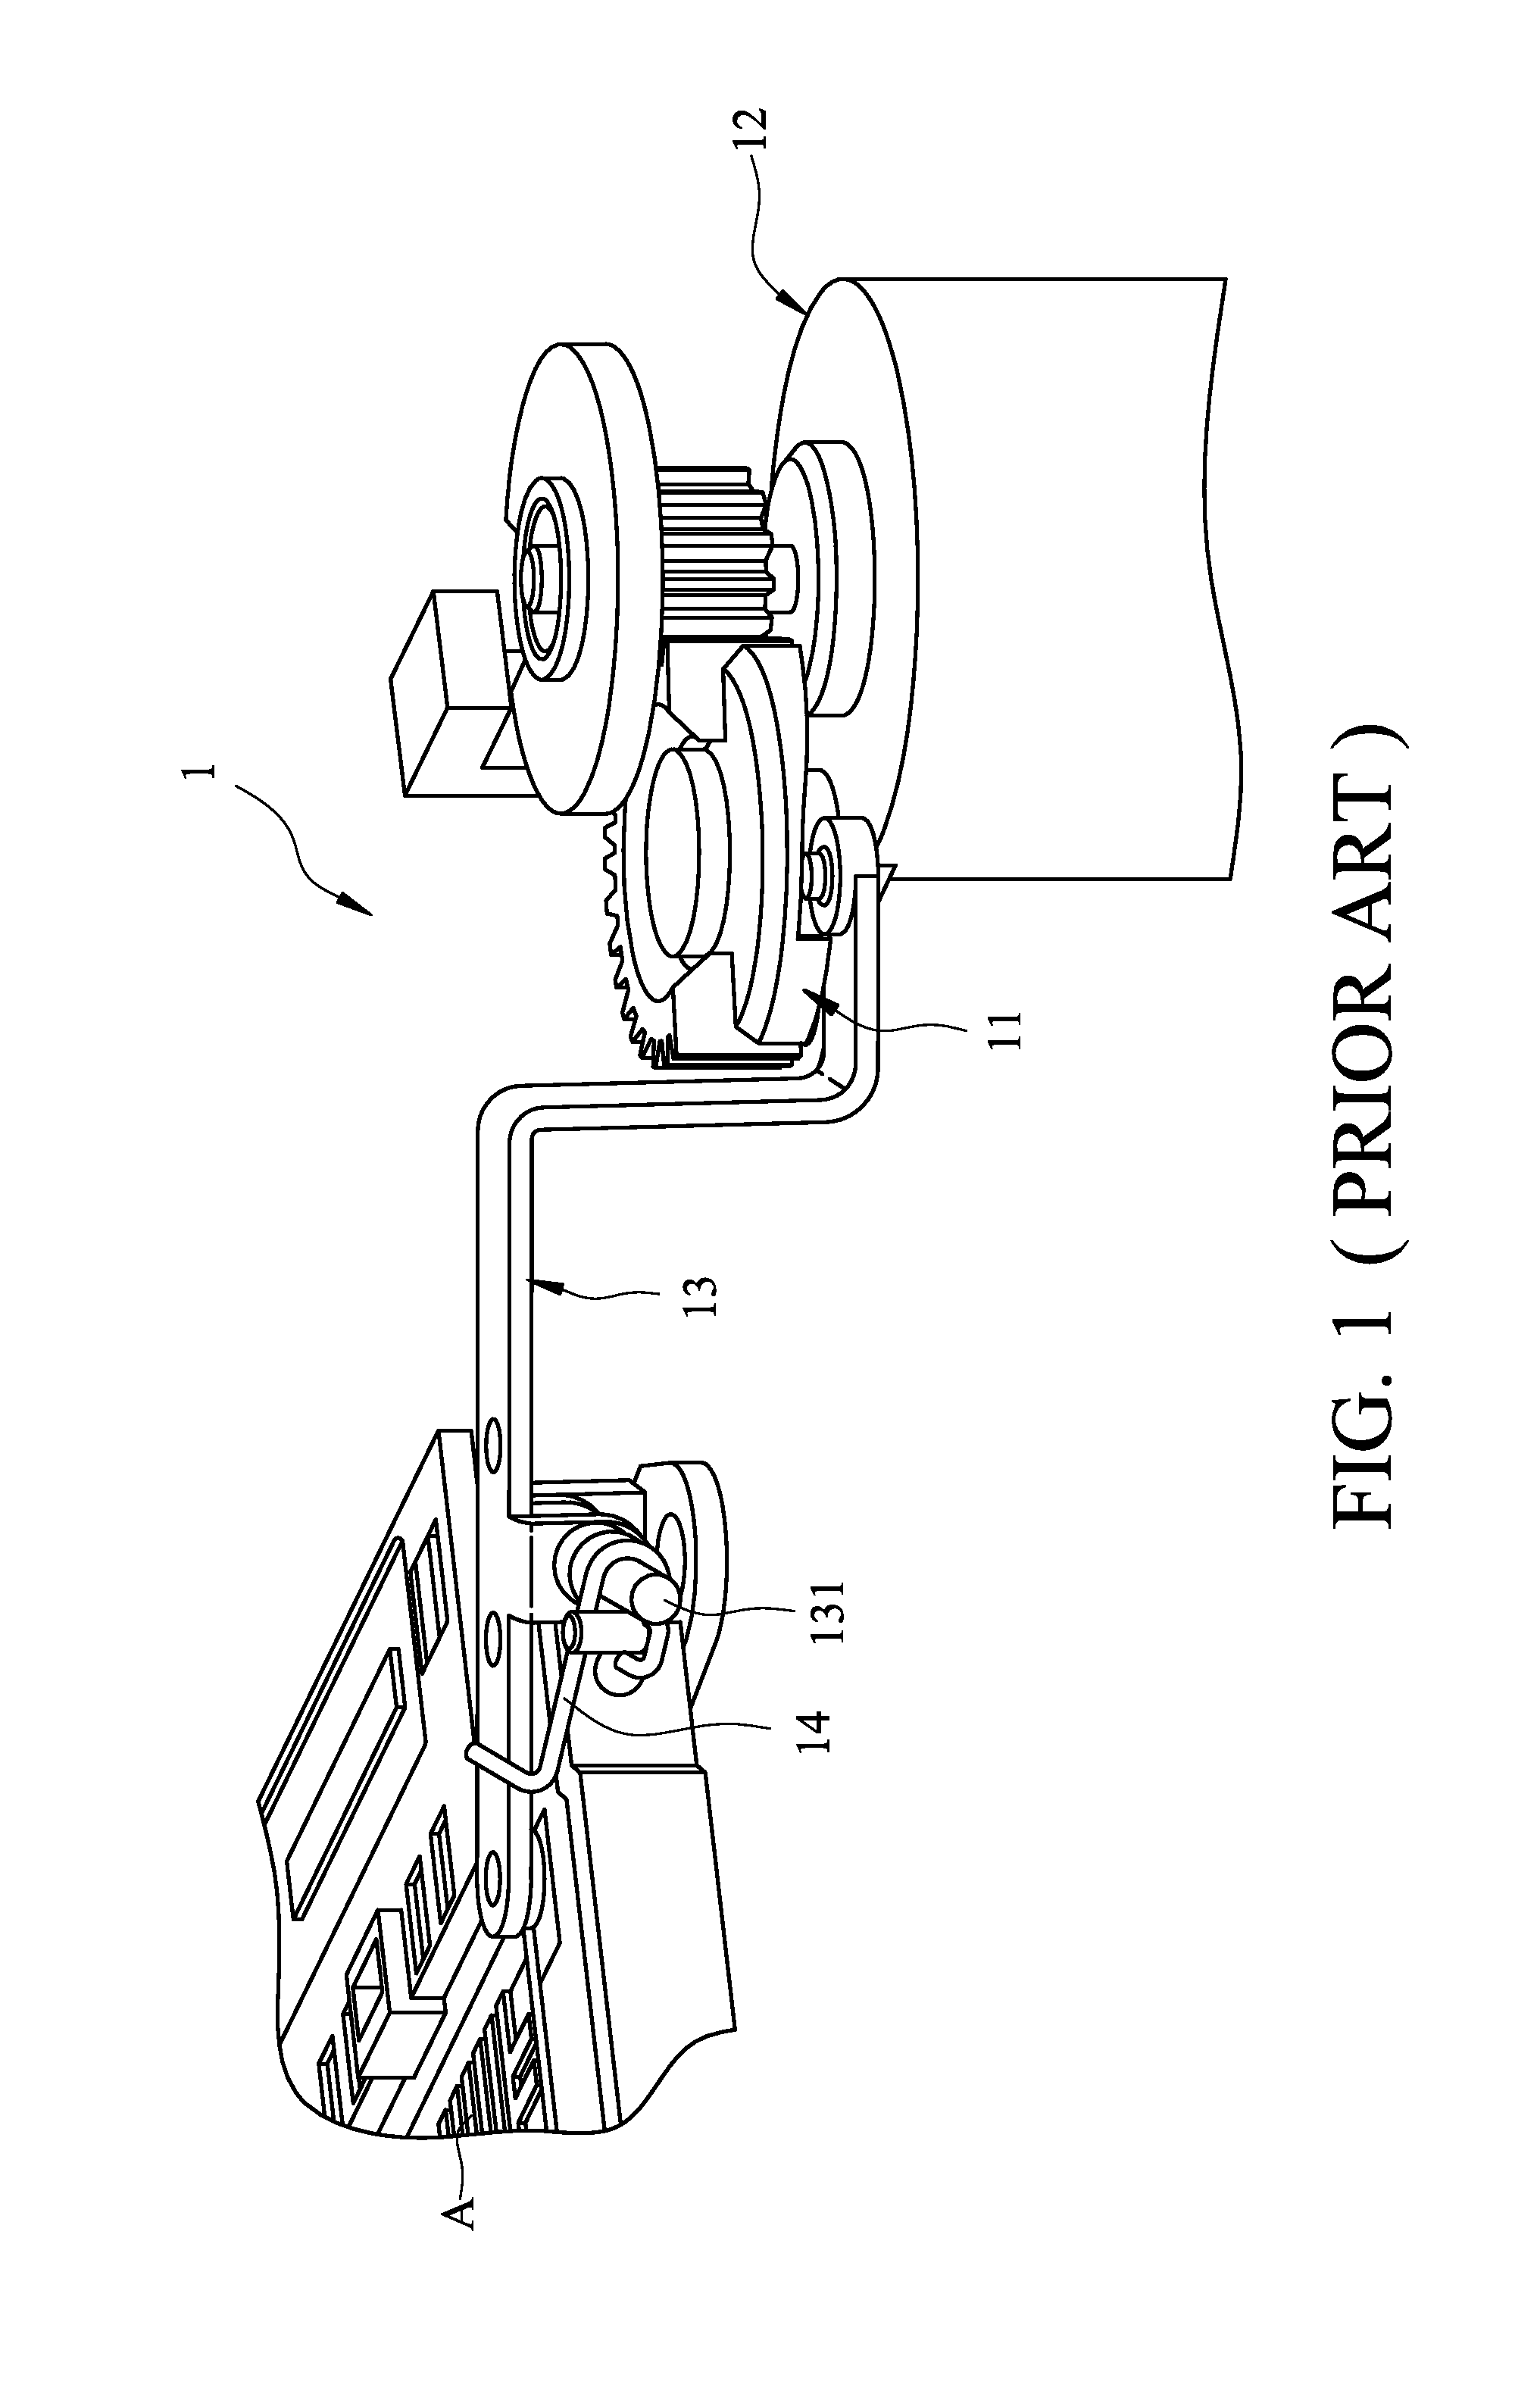 Anti-shake device for optical instrument